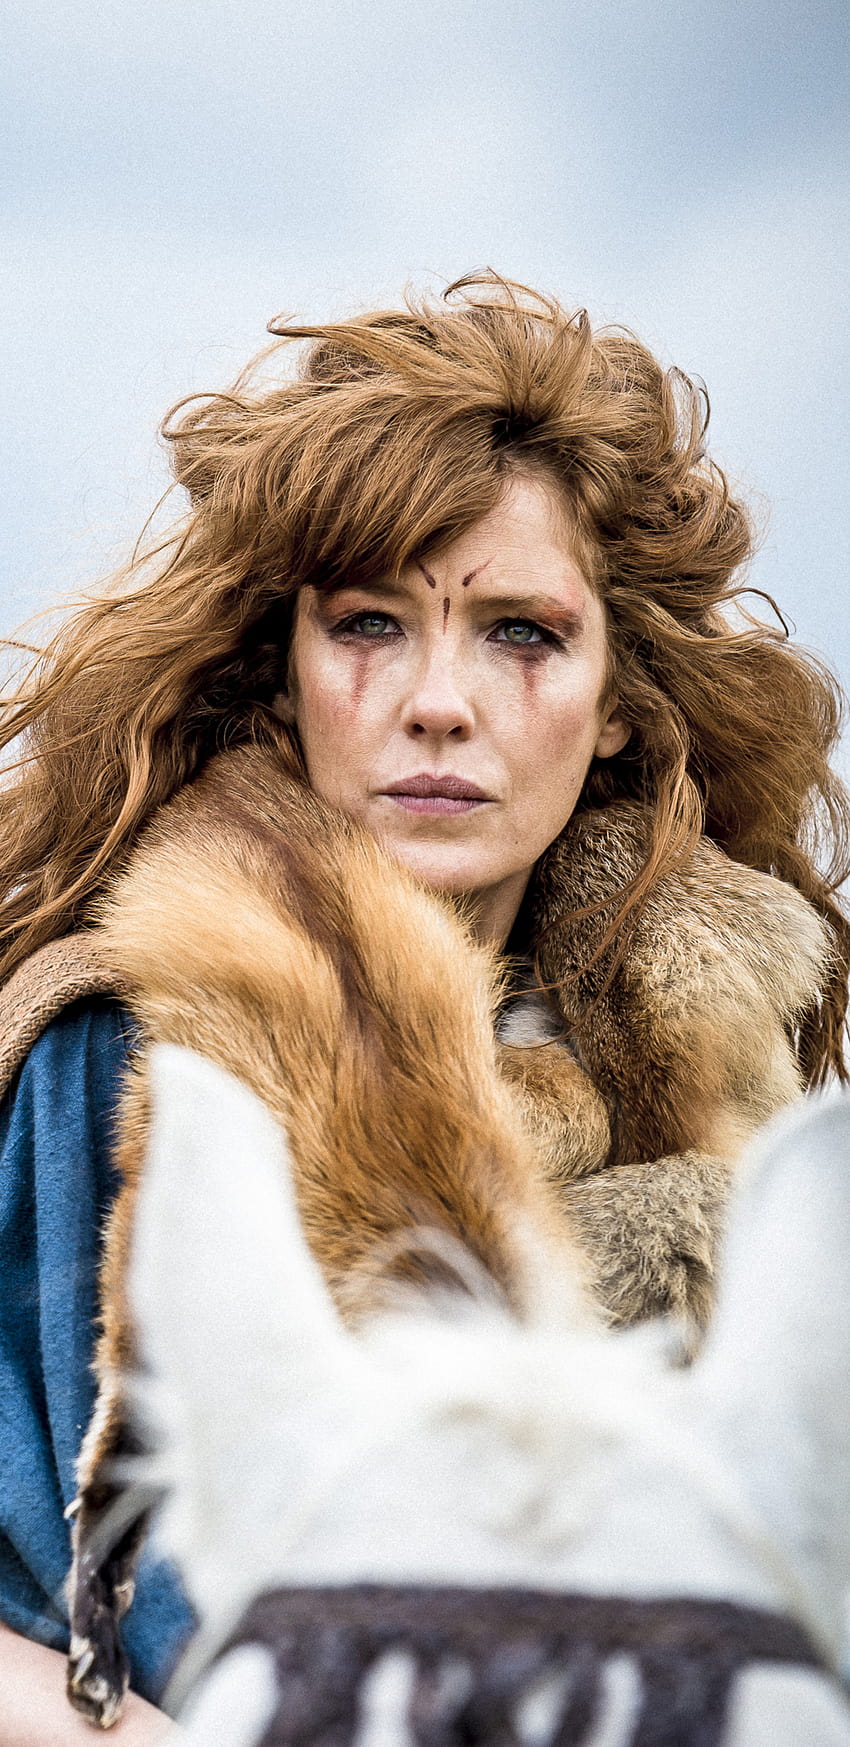 1440x2960 Kelly Reilly In Britannia TV Series Samsung Galaxy Note 9,8, S9,S8,S Q , Backgrounds, and HD phone wallpaper